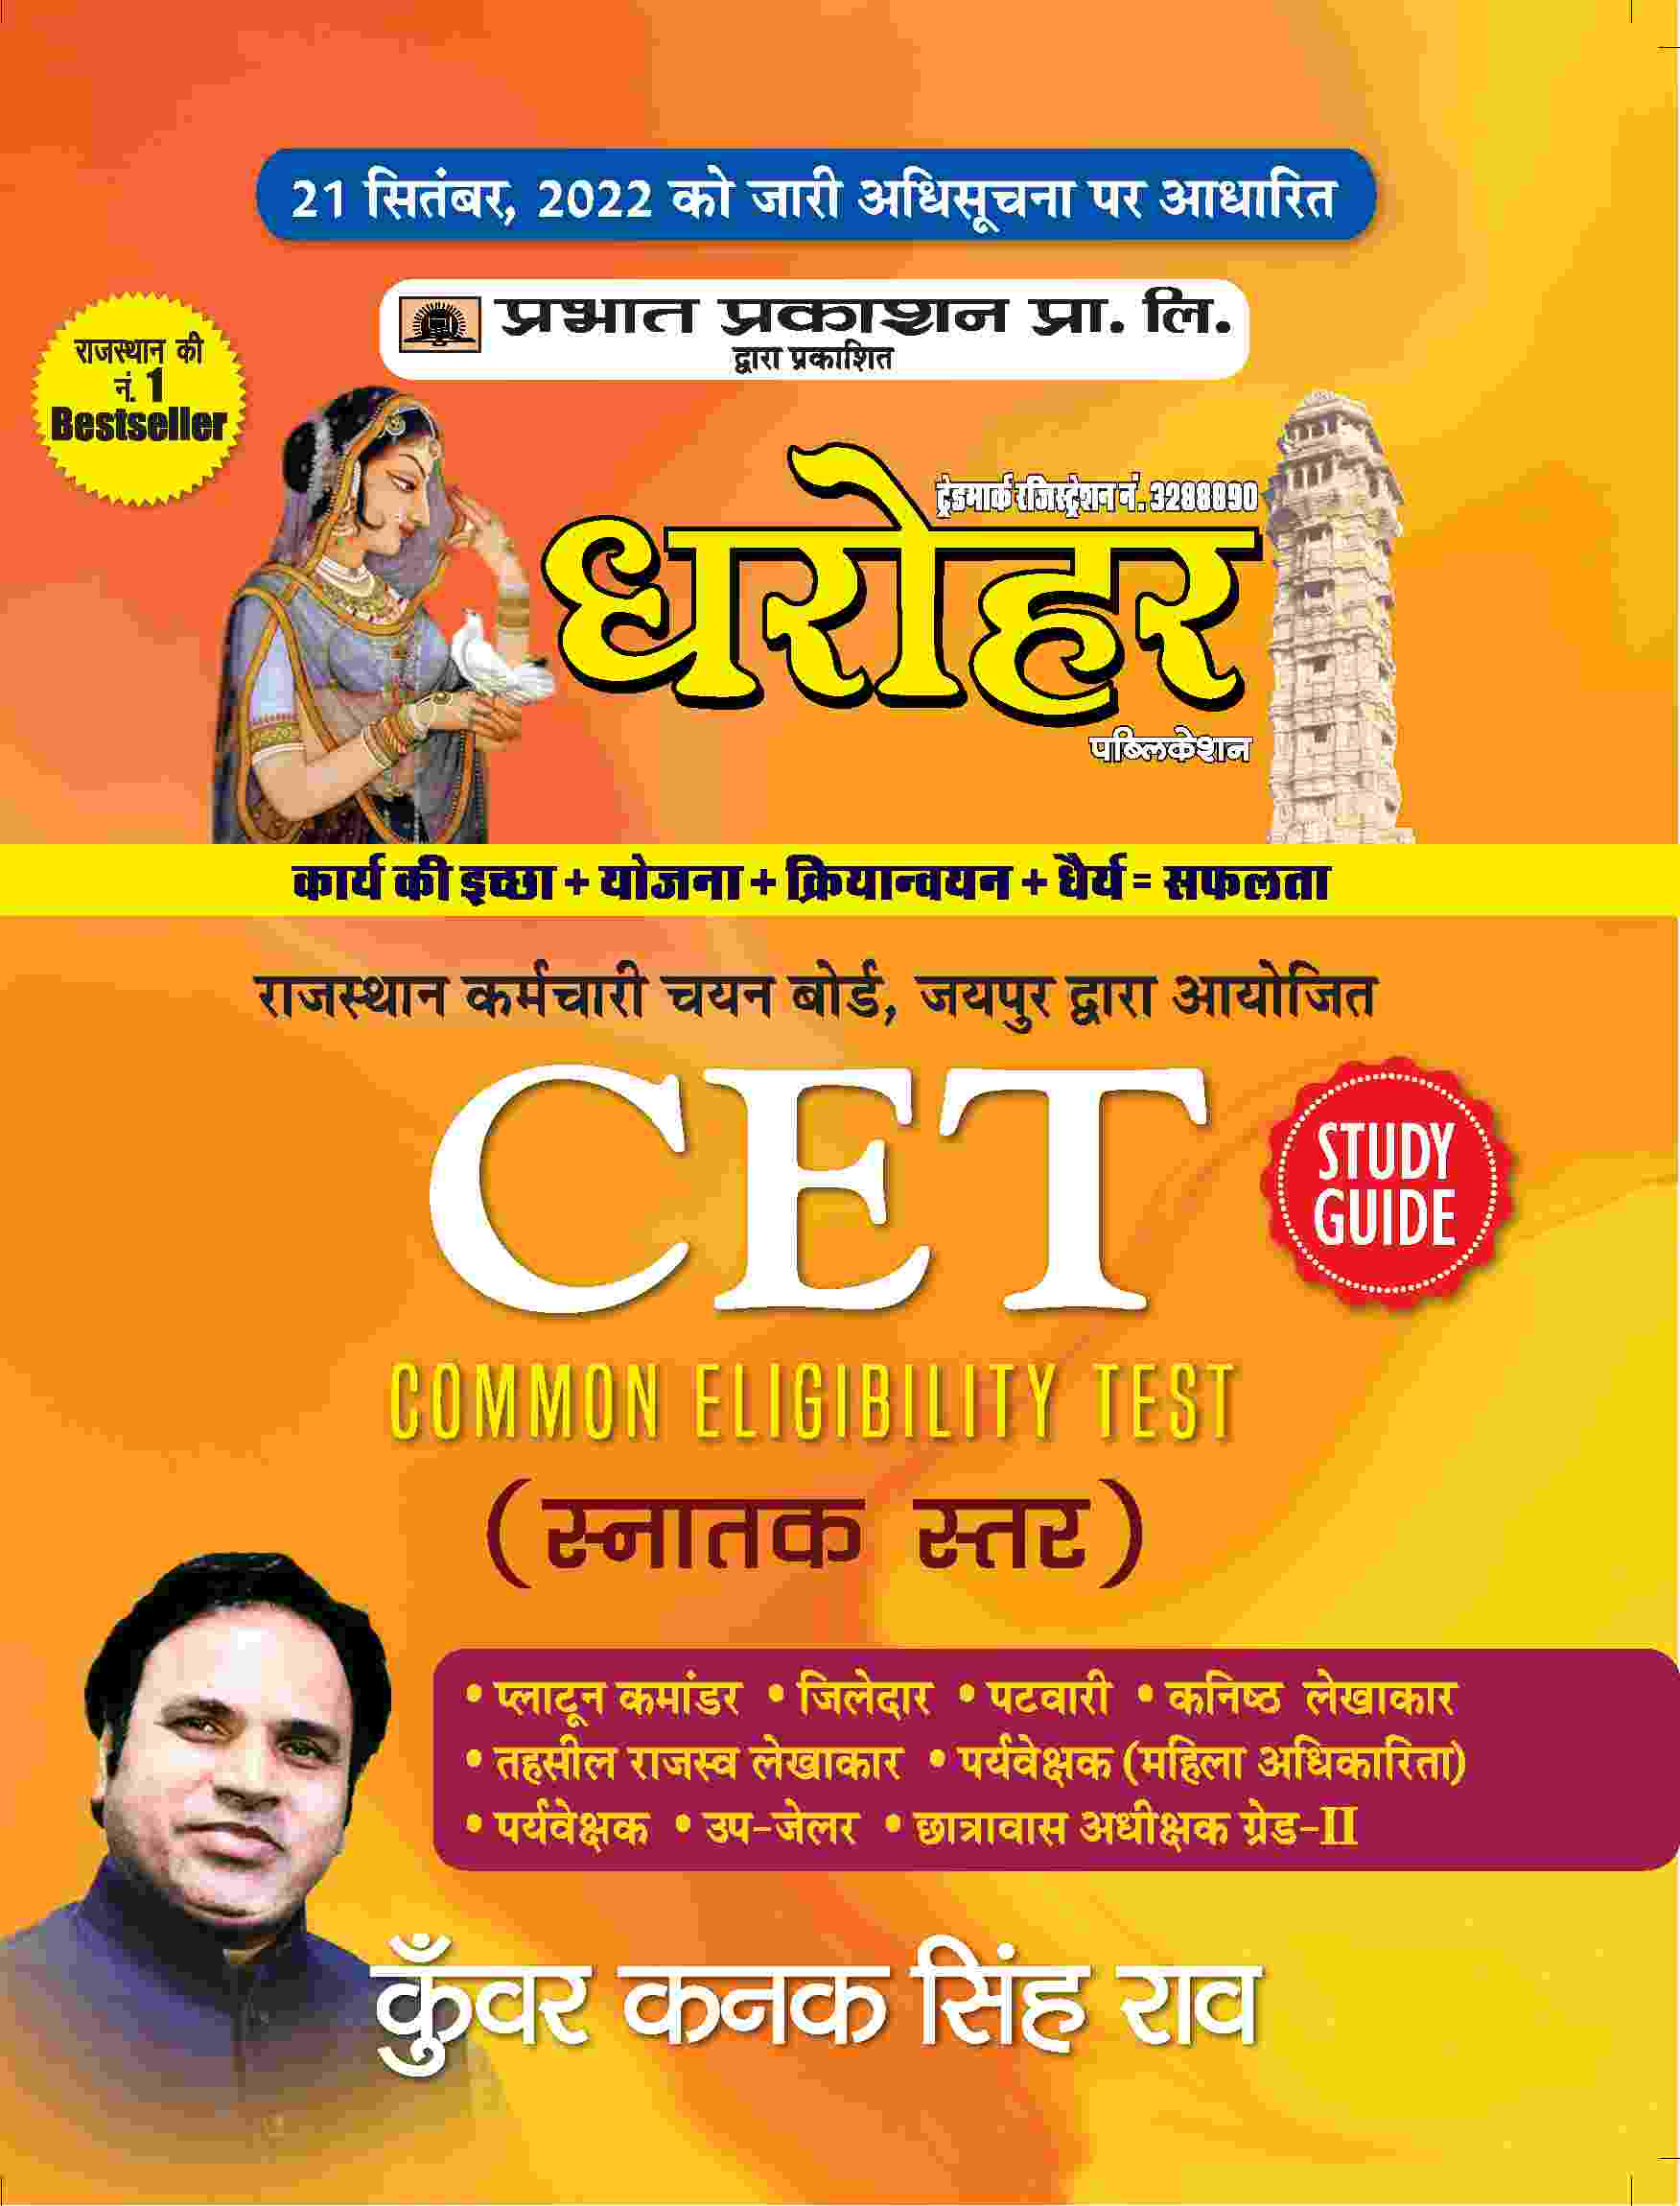 Dharohar CET Snaktak Star (Rajasthan Common Eligibility Test Graduate Level Study Guide in Hindi)